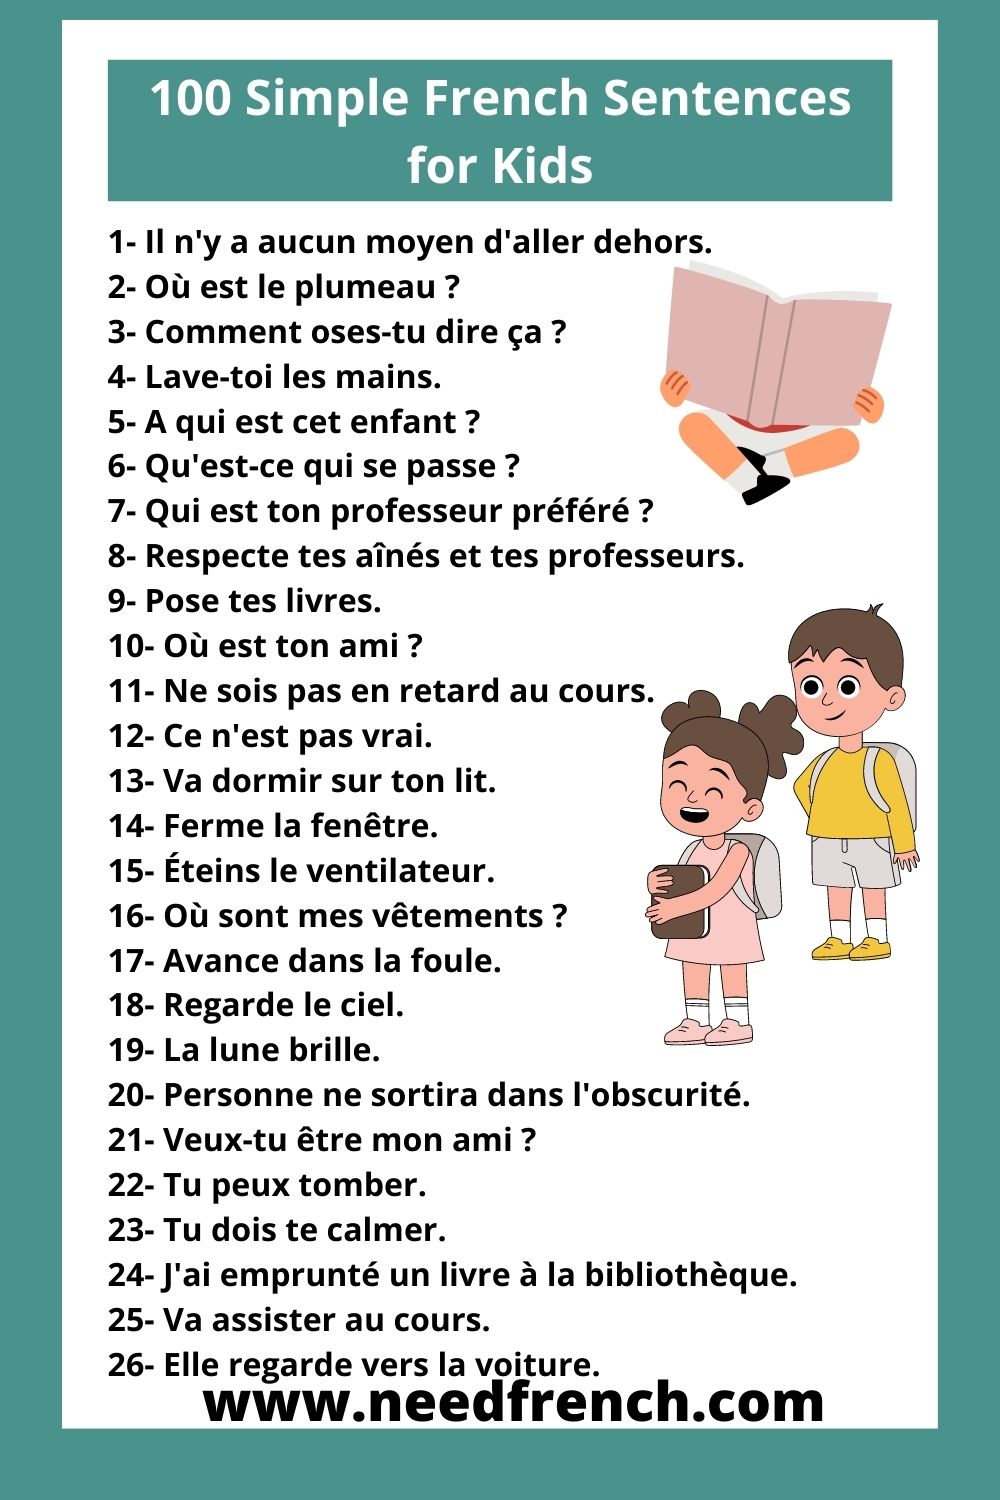 100-simple-french-sentences-for-kids-needfrench